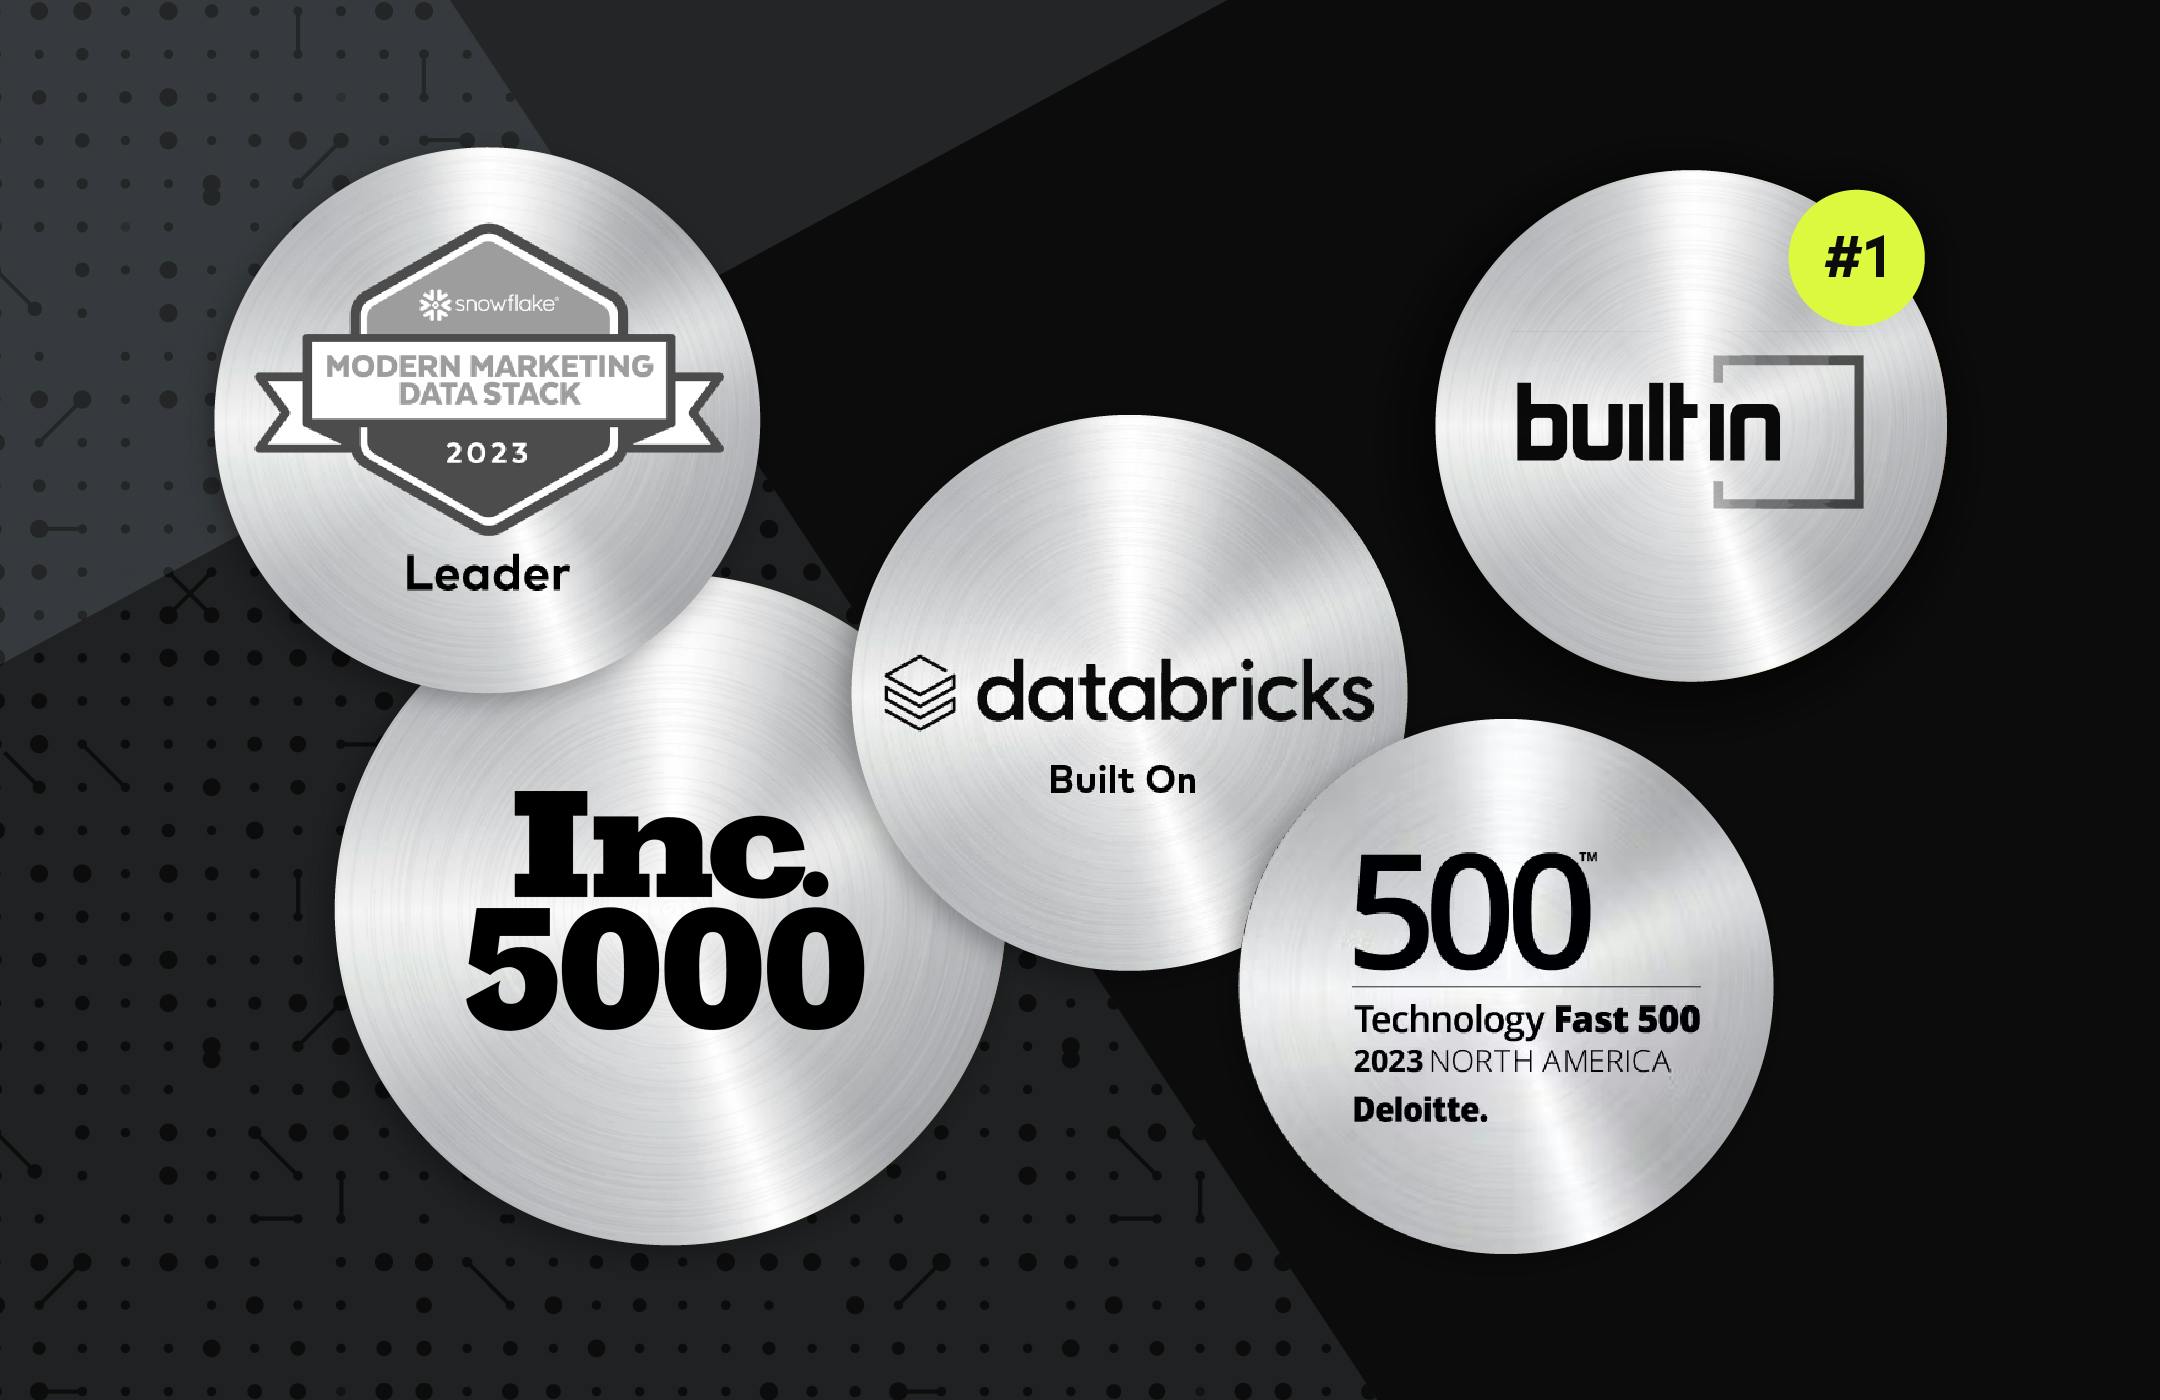 Collection of awards from Databricks, Inc5000, BuiltIn, and more.